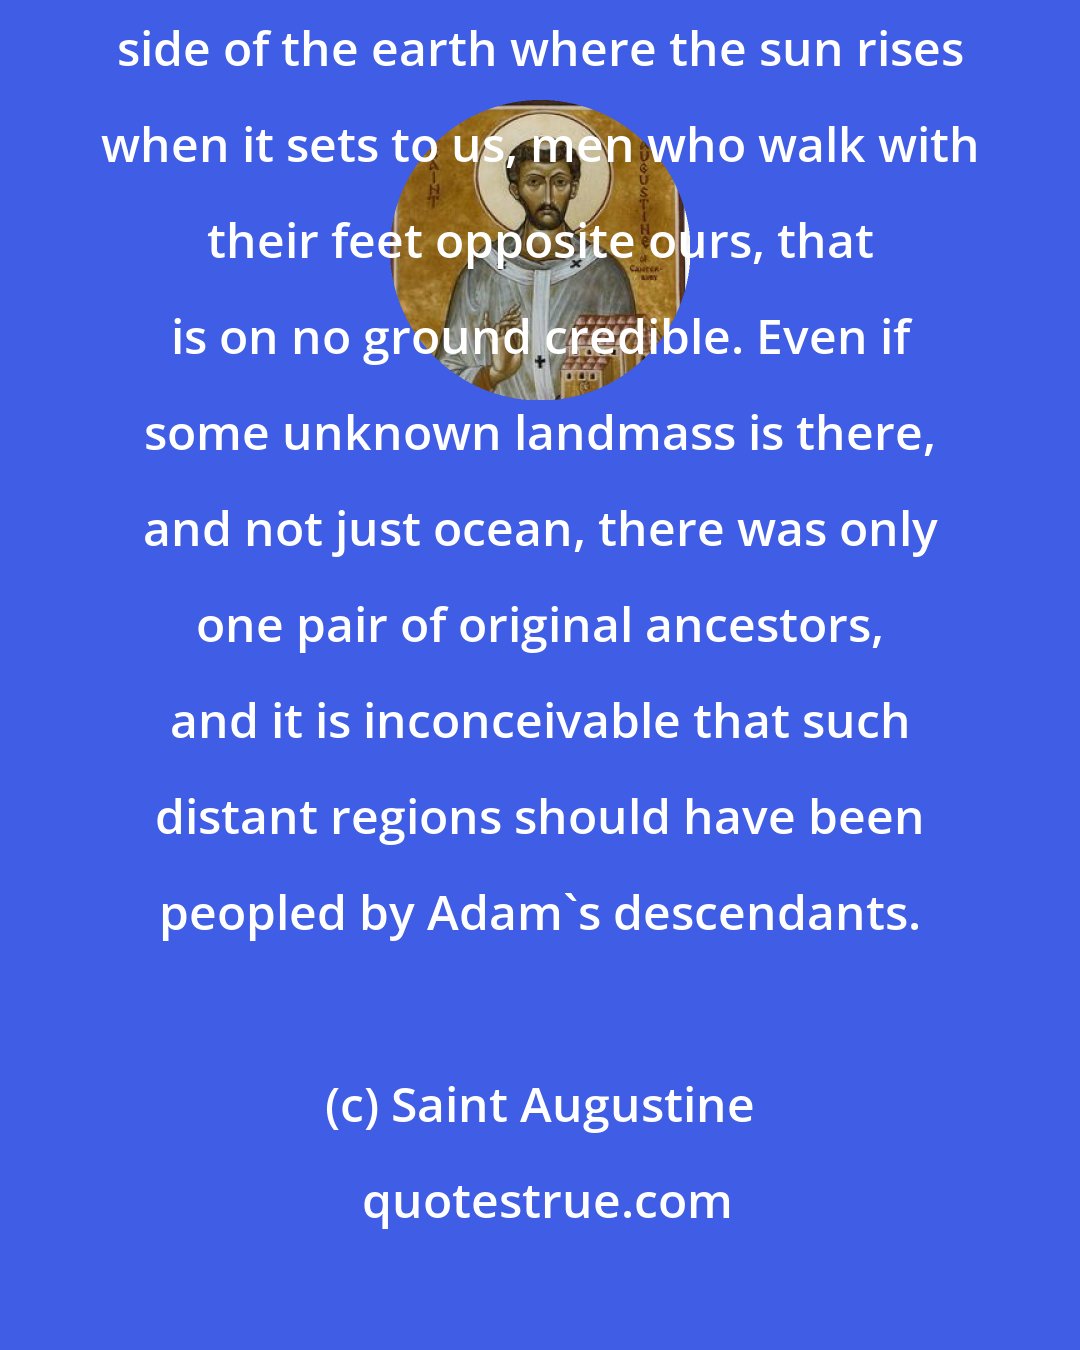 Saint Augustine: As to the fable that there are Antipodes, that is to say, men on the opposite side of the earth where the sun rises when it sets to us, men who walk with their feet opposite ours, that is on no ground credible. Even if some unknown landmass is there, and not just ocean, there was only one pair of original ancestors, and it is inconceivable that such distant regions should have been peopled by Adam's descendants.